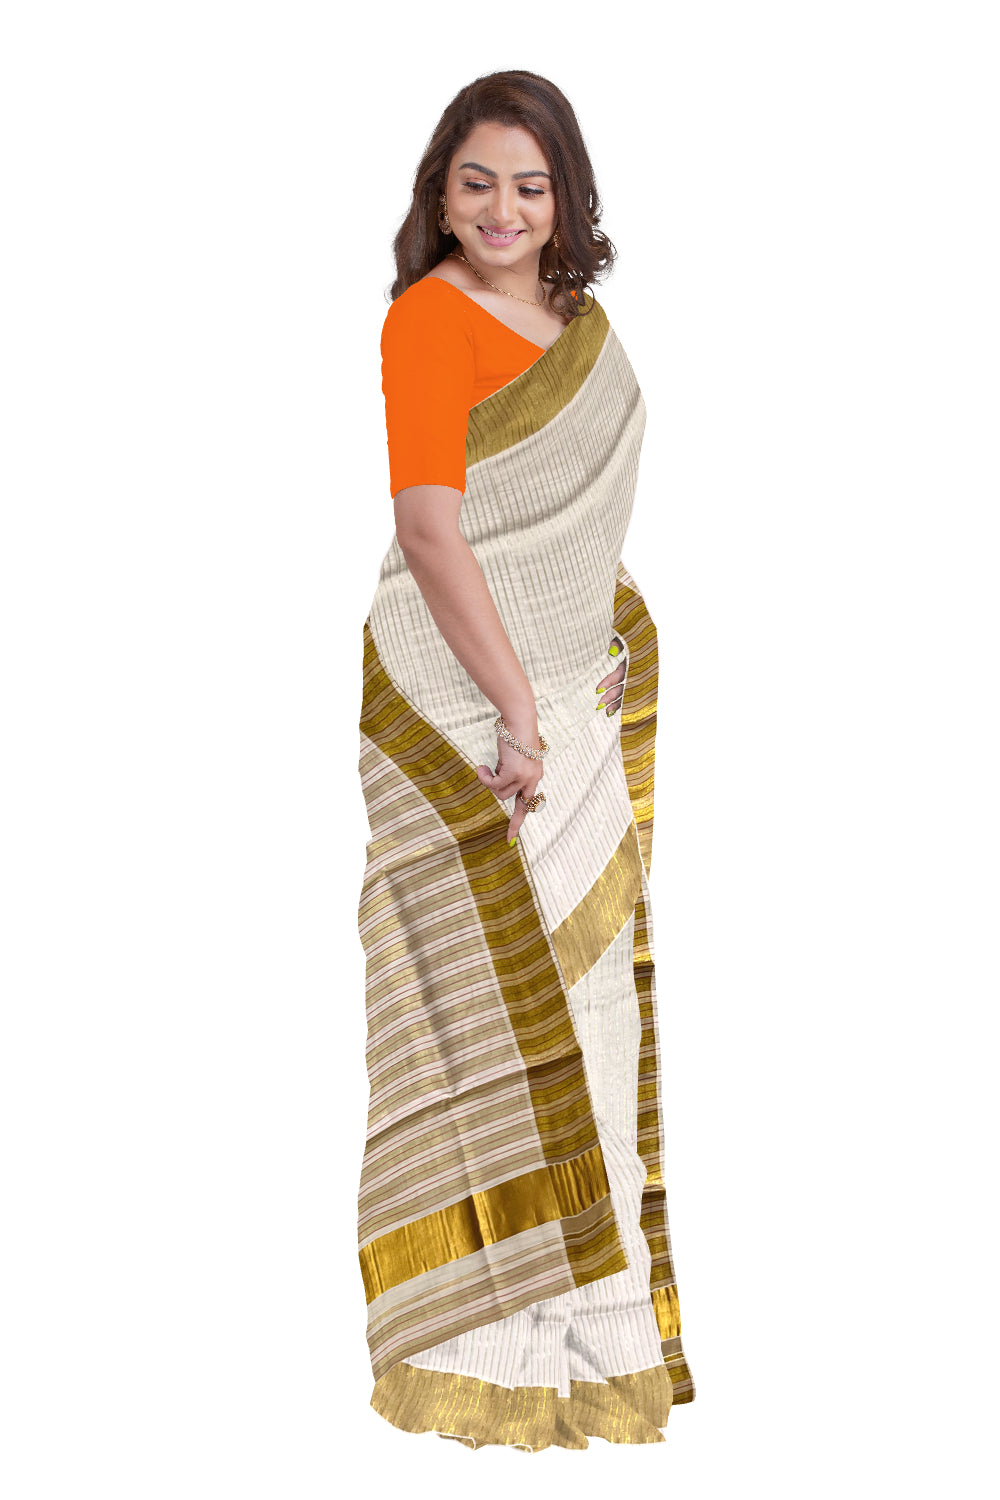 Pure Cotton Kerala Kasavu Saree with Lines Designs on Body and Pink Lines on Munthani